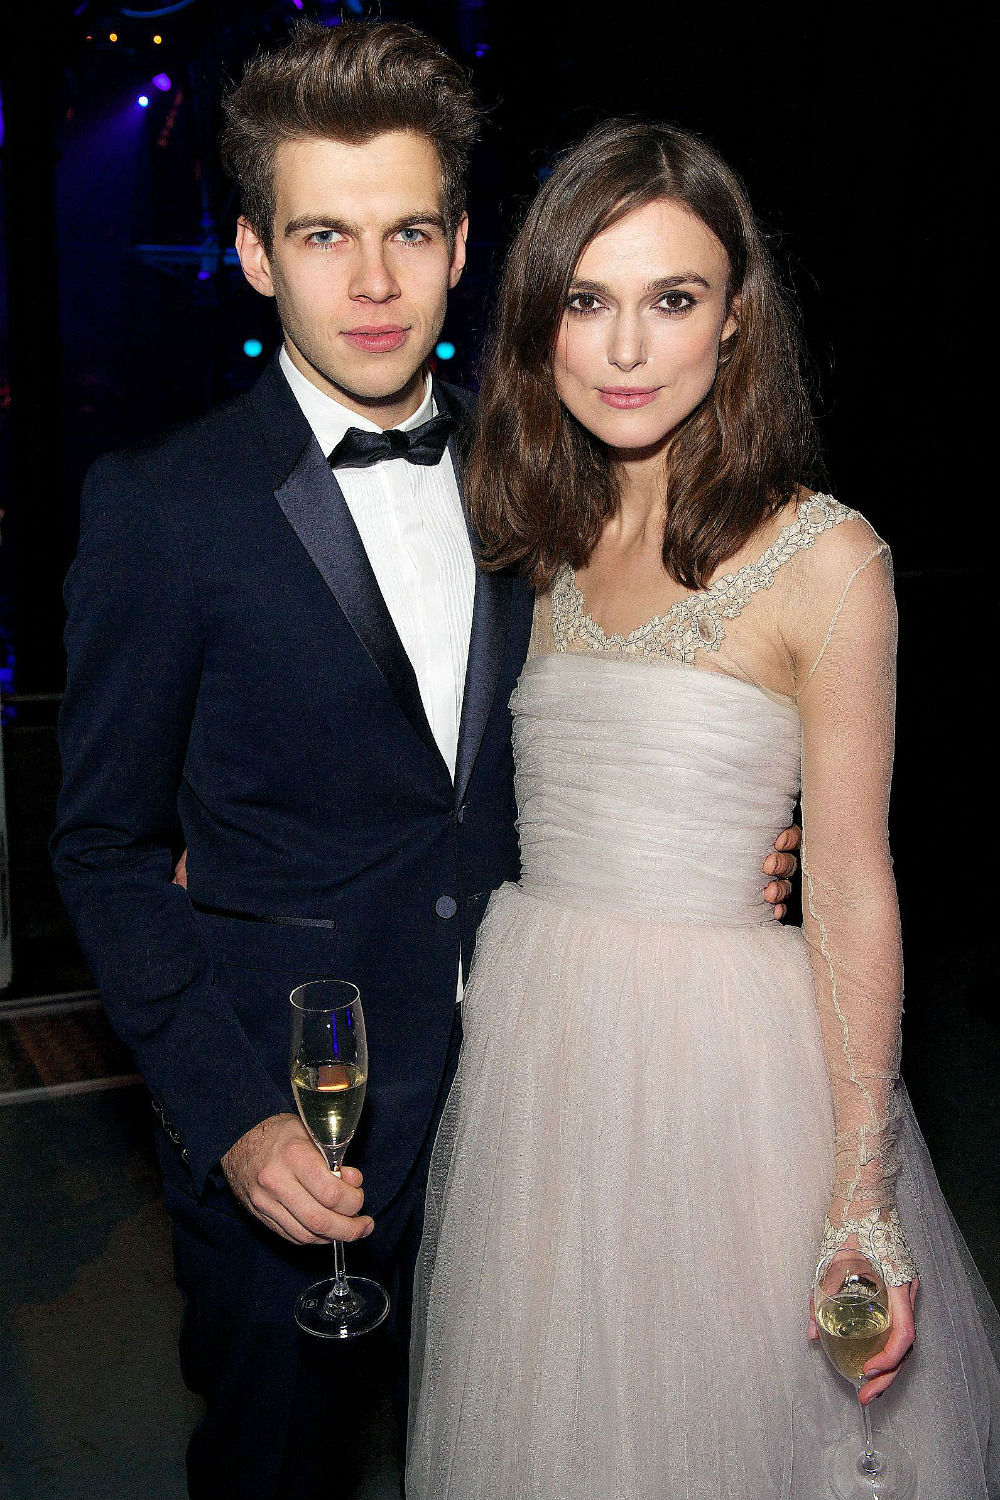 Keira Knightley Wears Her Wedding Dress on the Red Carpet (Again)!